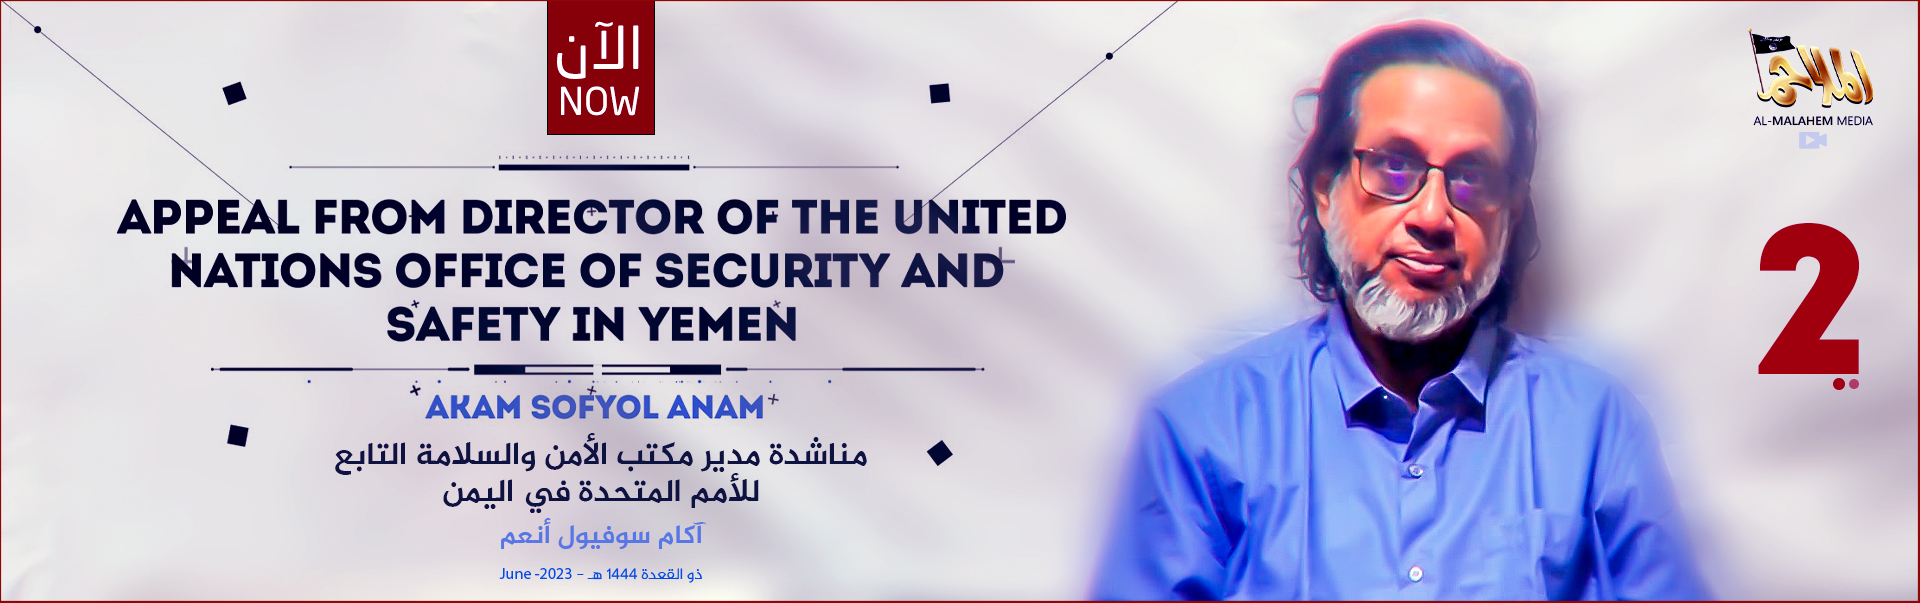 TRAC Incident Report: al-Malahem Media (al-Qaeda in the Arabian Peninsula / AQAP / AQY / ASY) Releases Proof of life Video of the Director of the United Nations Office of Security and Safety in Yemen "Akam Sofyol Anam" #2 - 12 June 2023